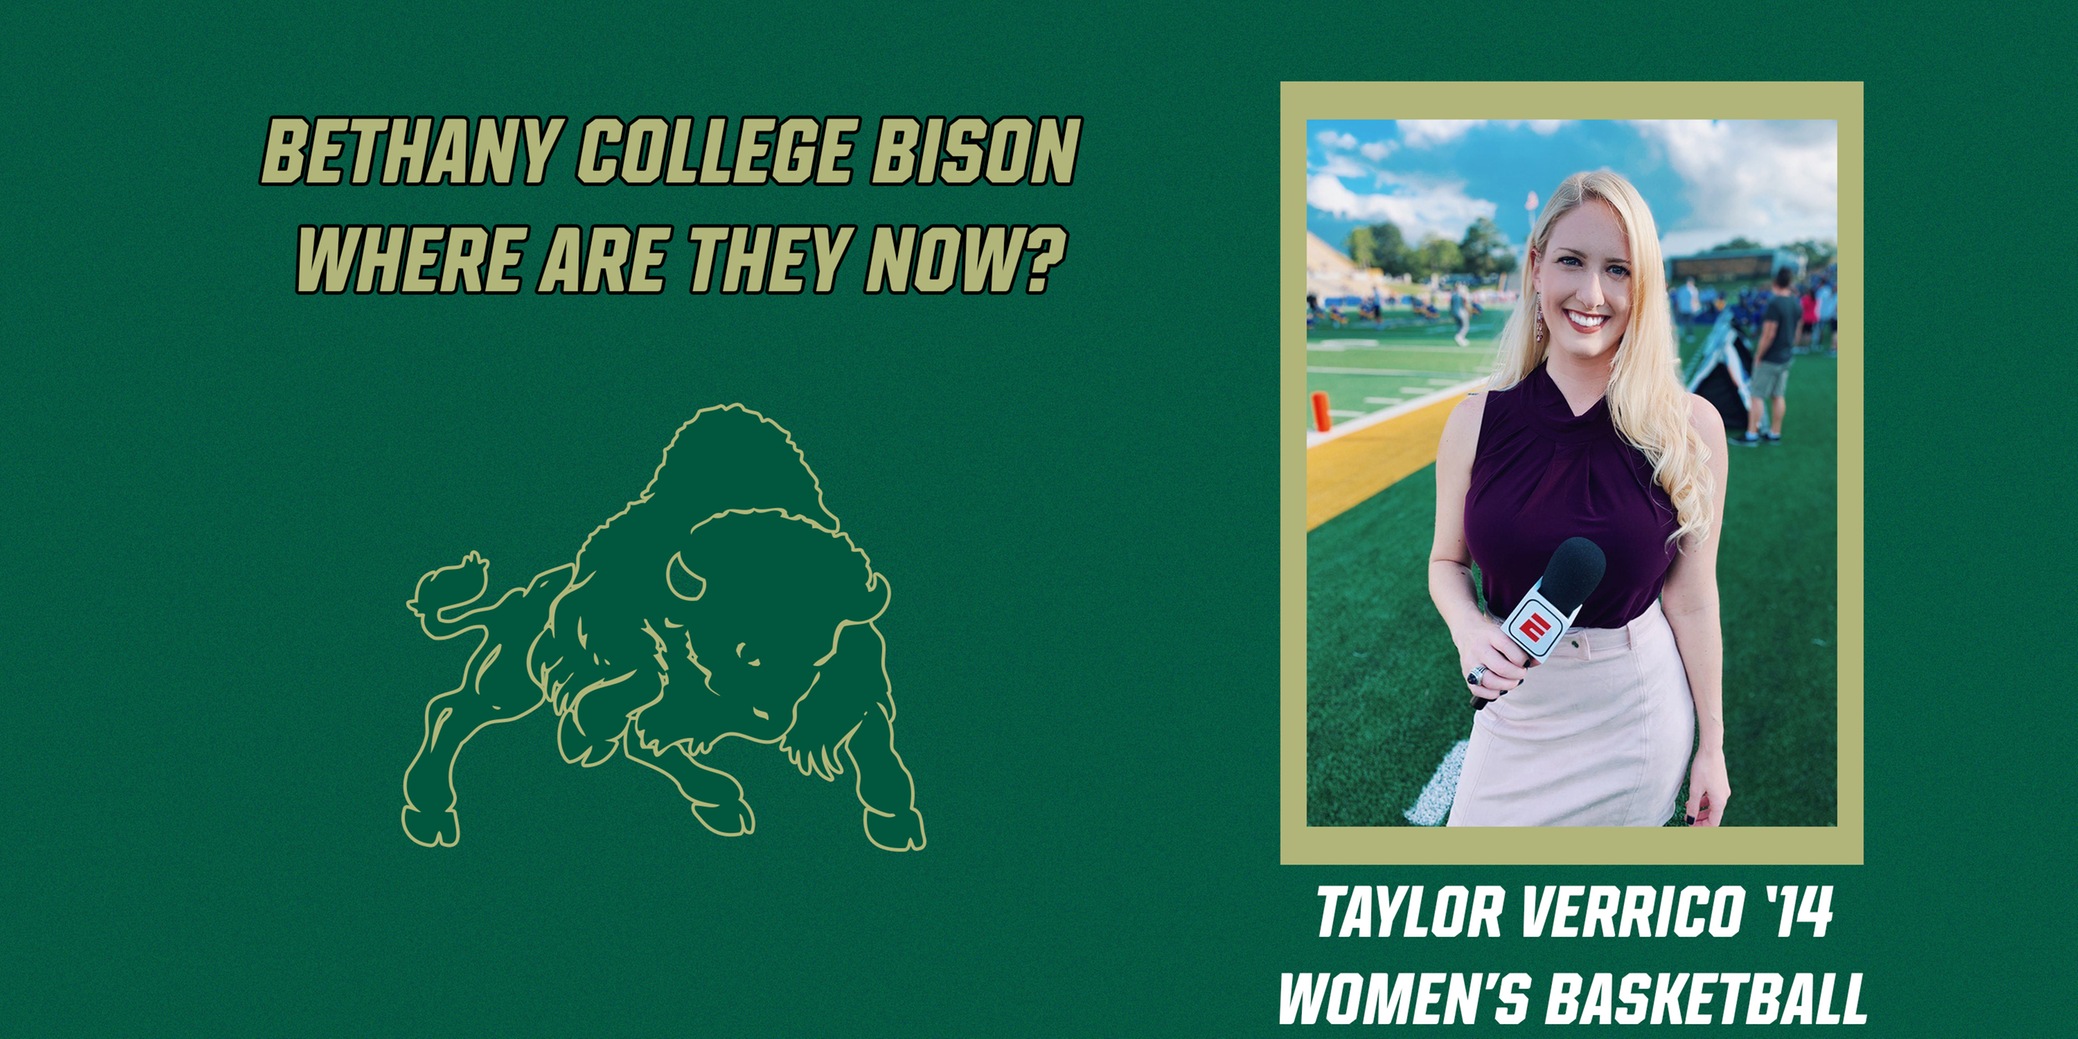 Where Are They Now Series - Taylor Verrico '14, Women's Basketball